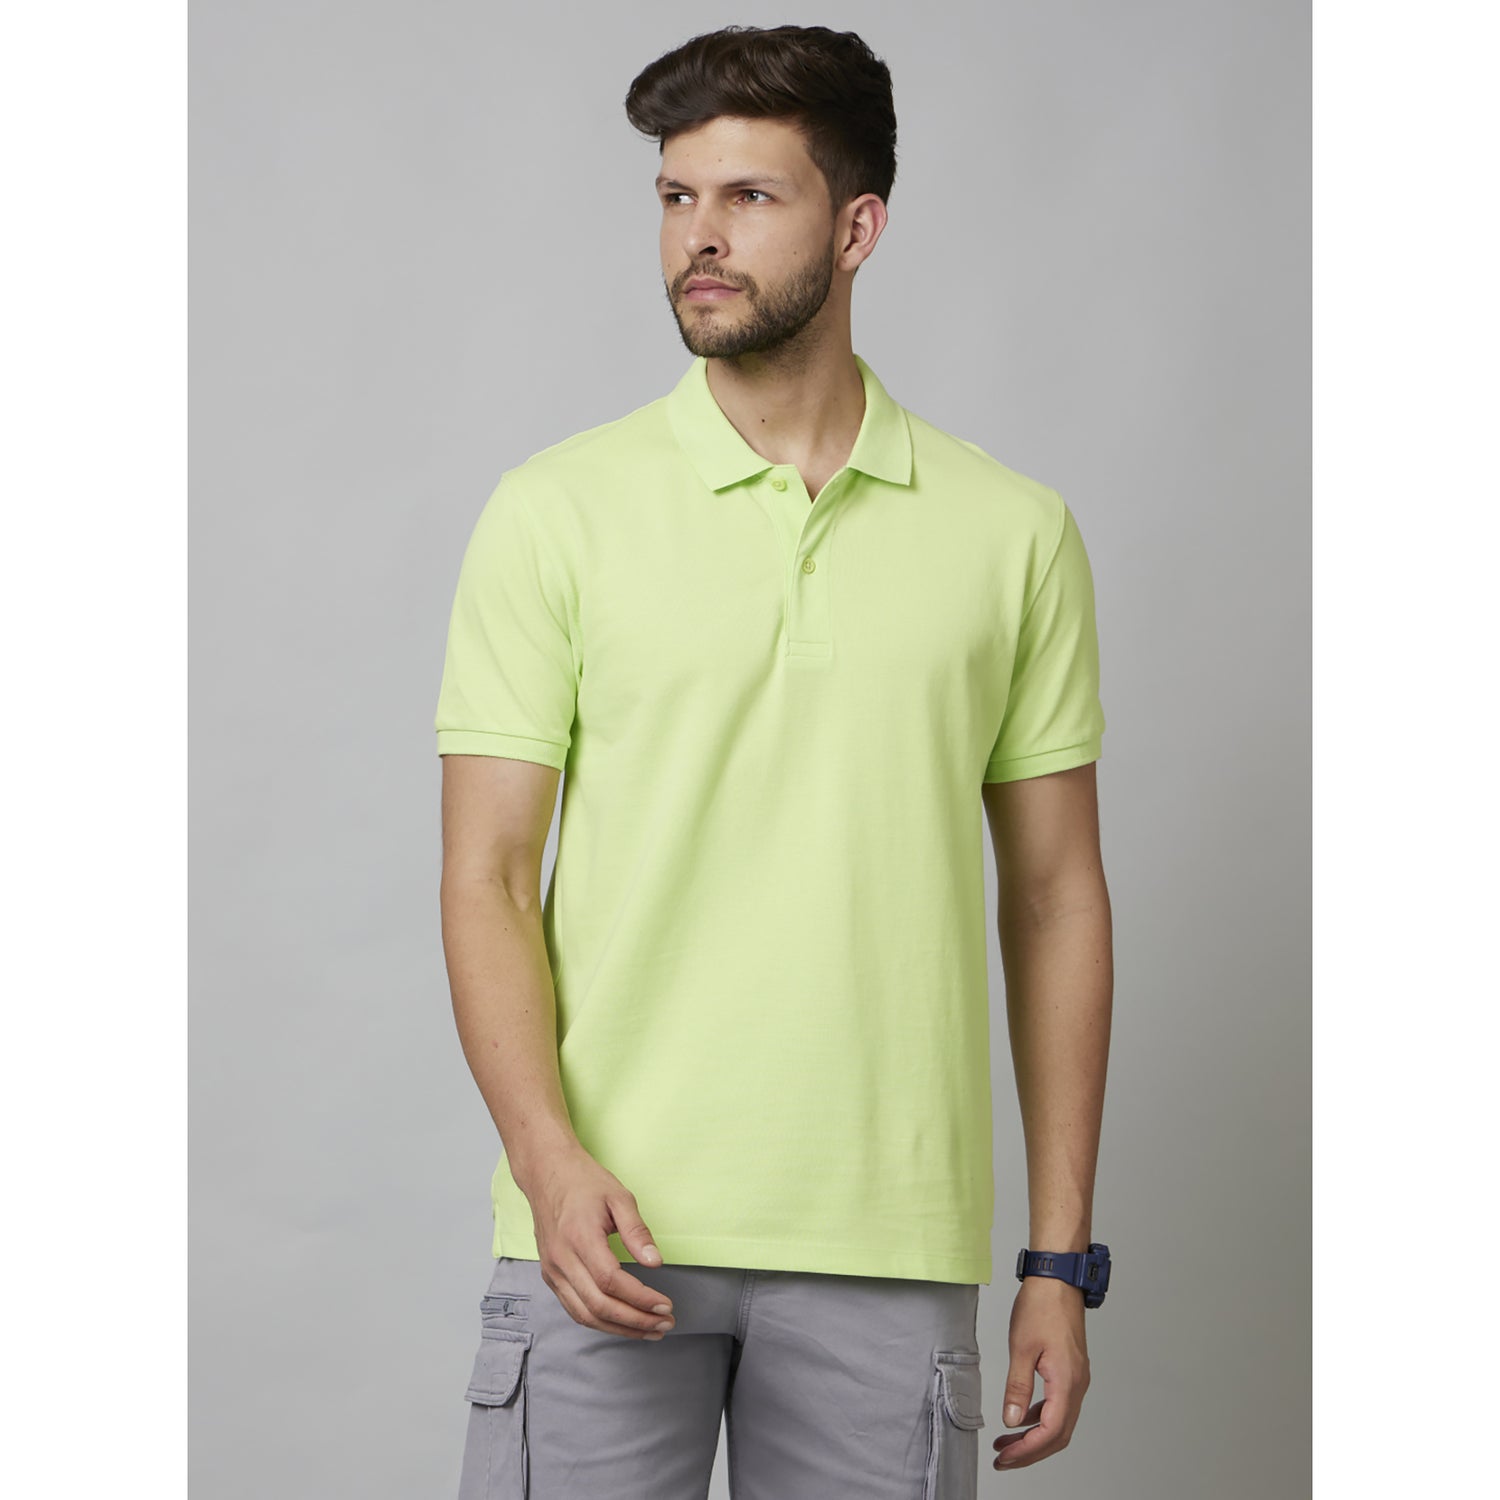 Green Solid Half Sleeve Cotton T-Shirts (TEONE2)